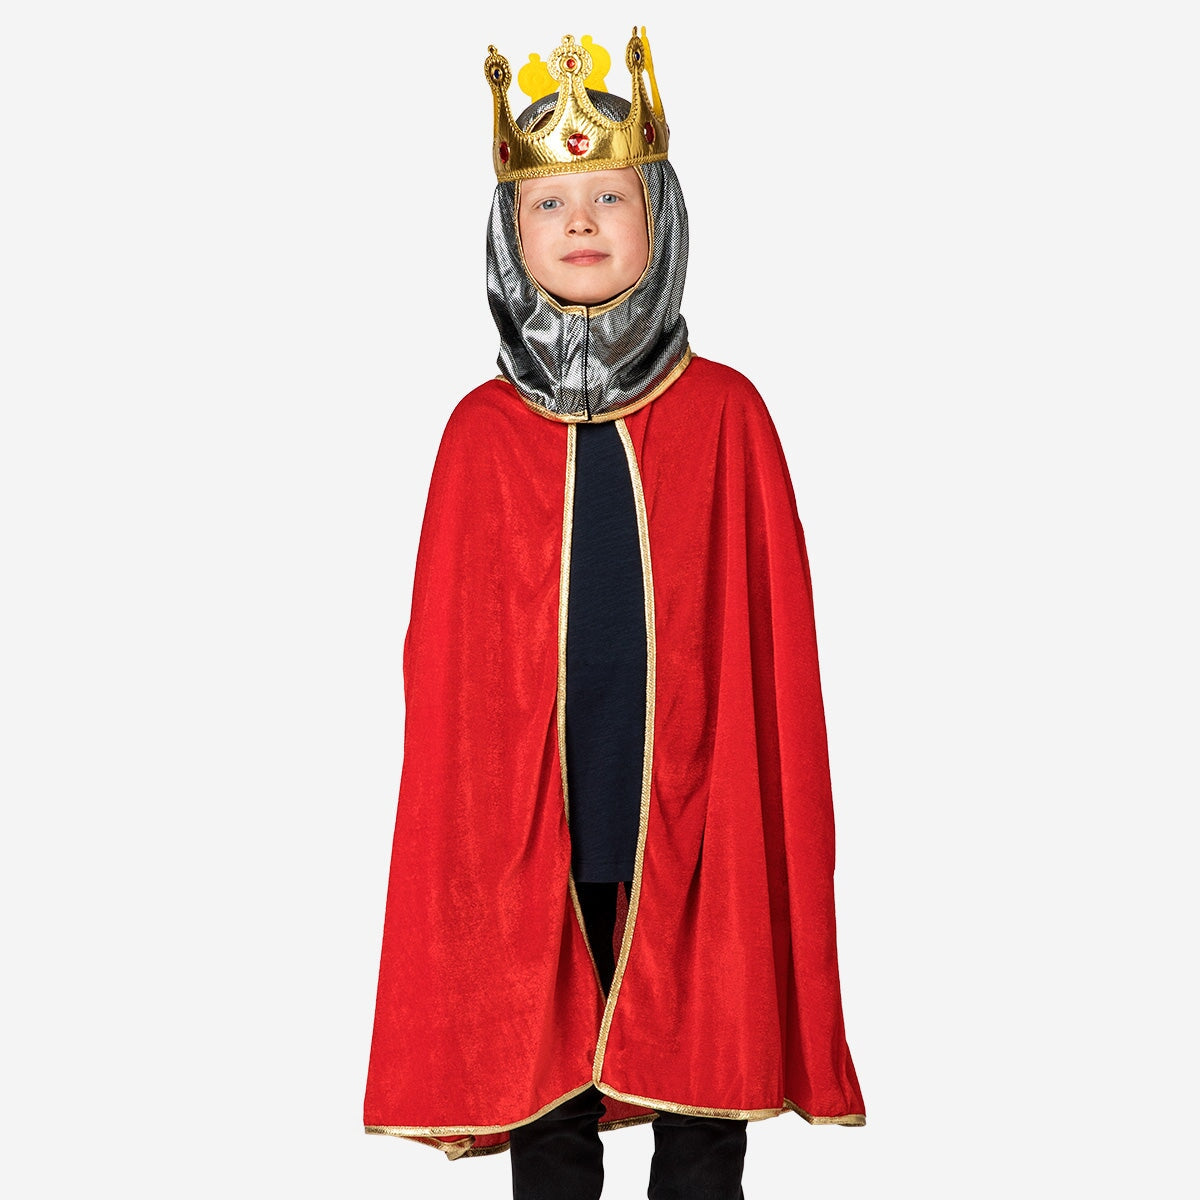 Knight costume. 4-8 years Party Flying Tiger Copenhagen 